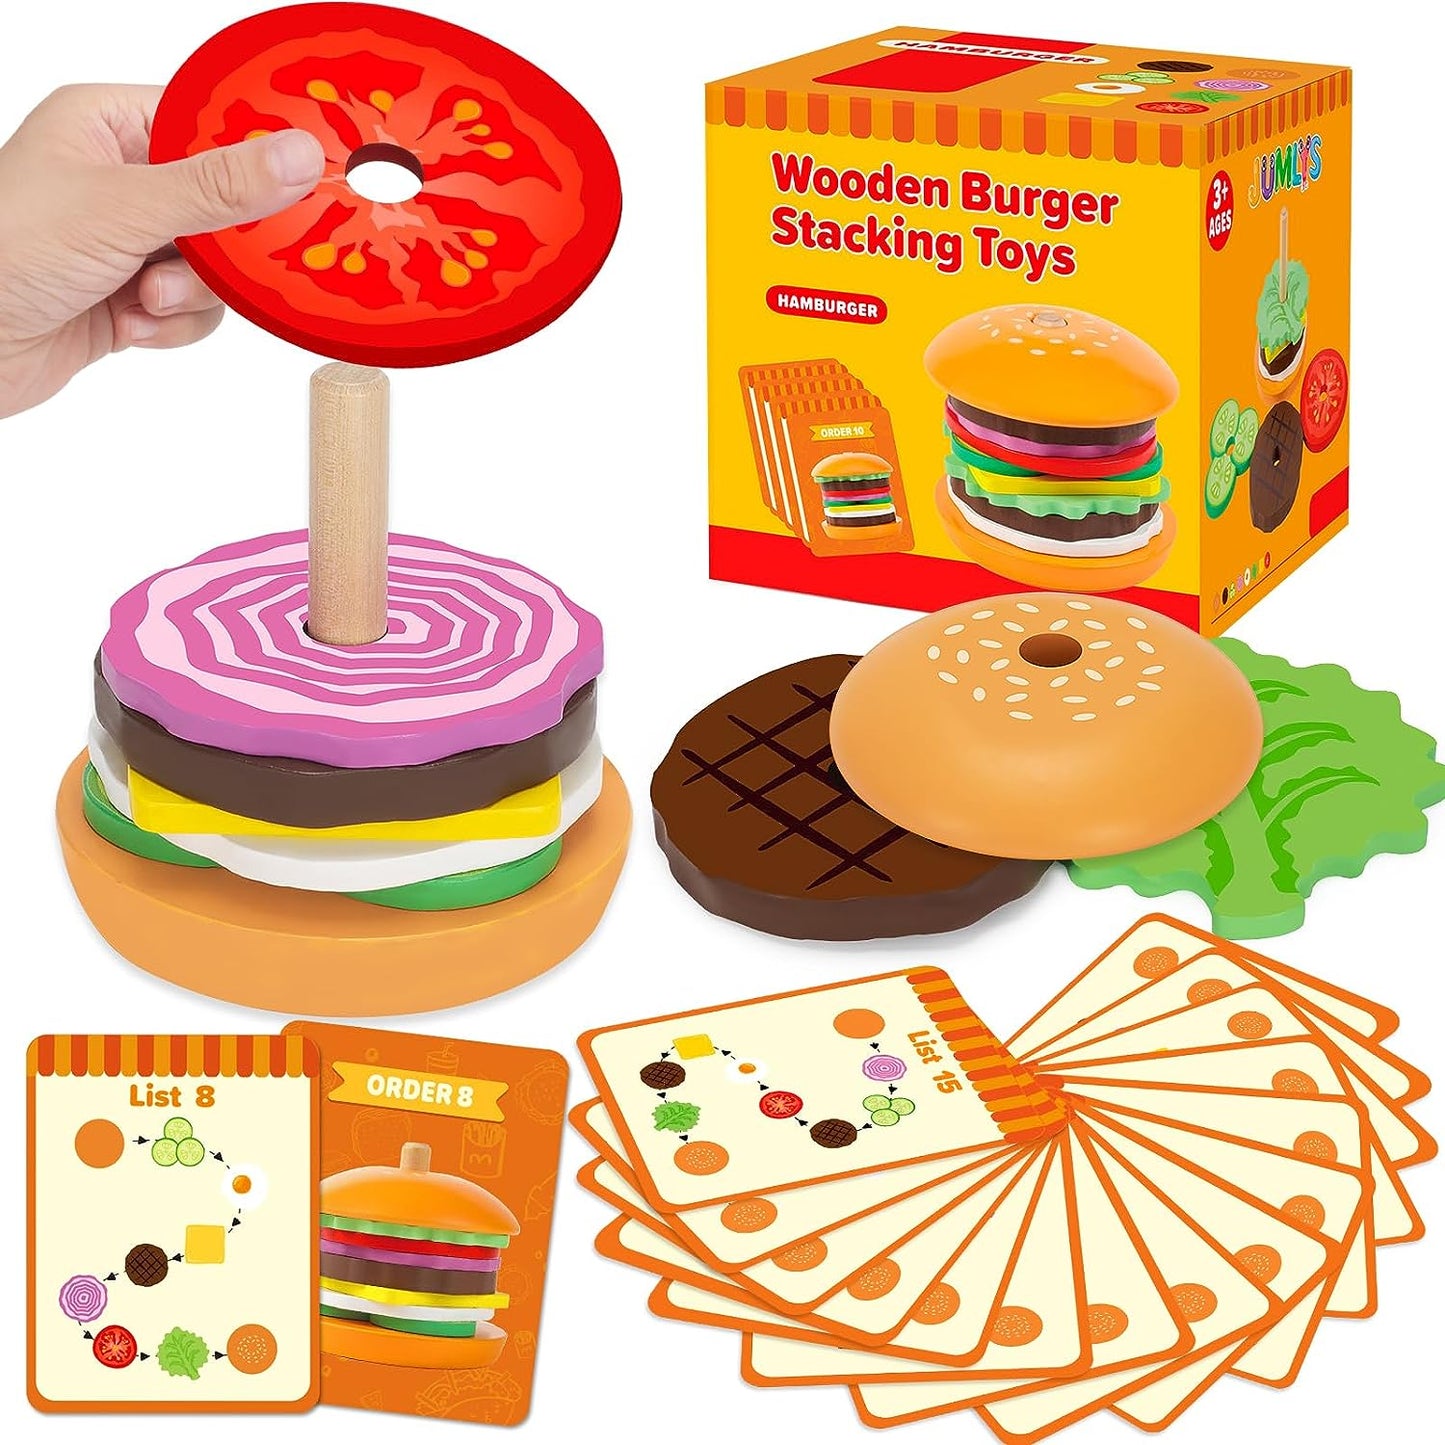 Wooden Burger Stacking Toy (15 activity cards)